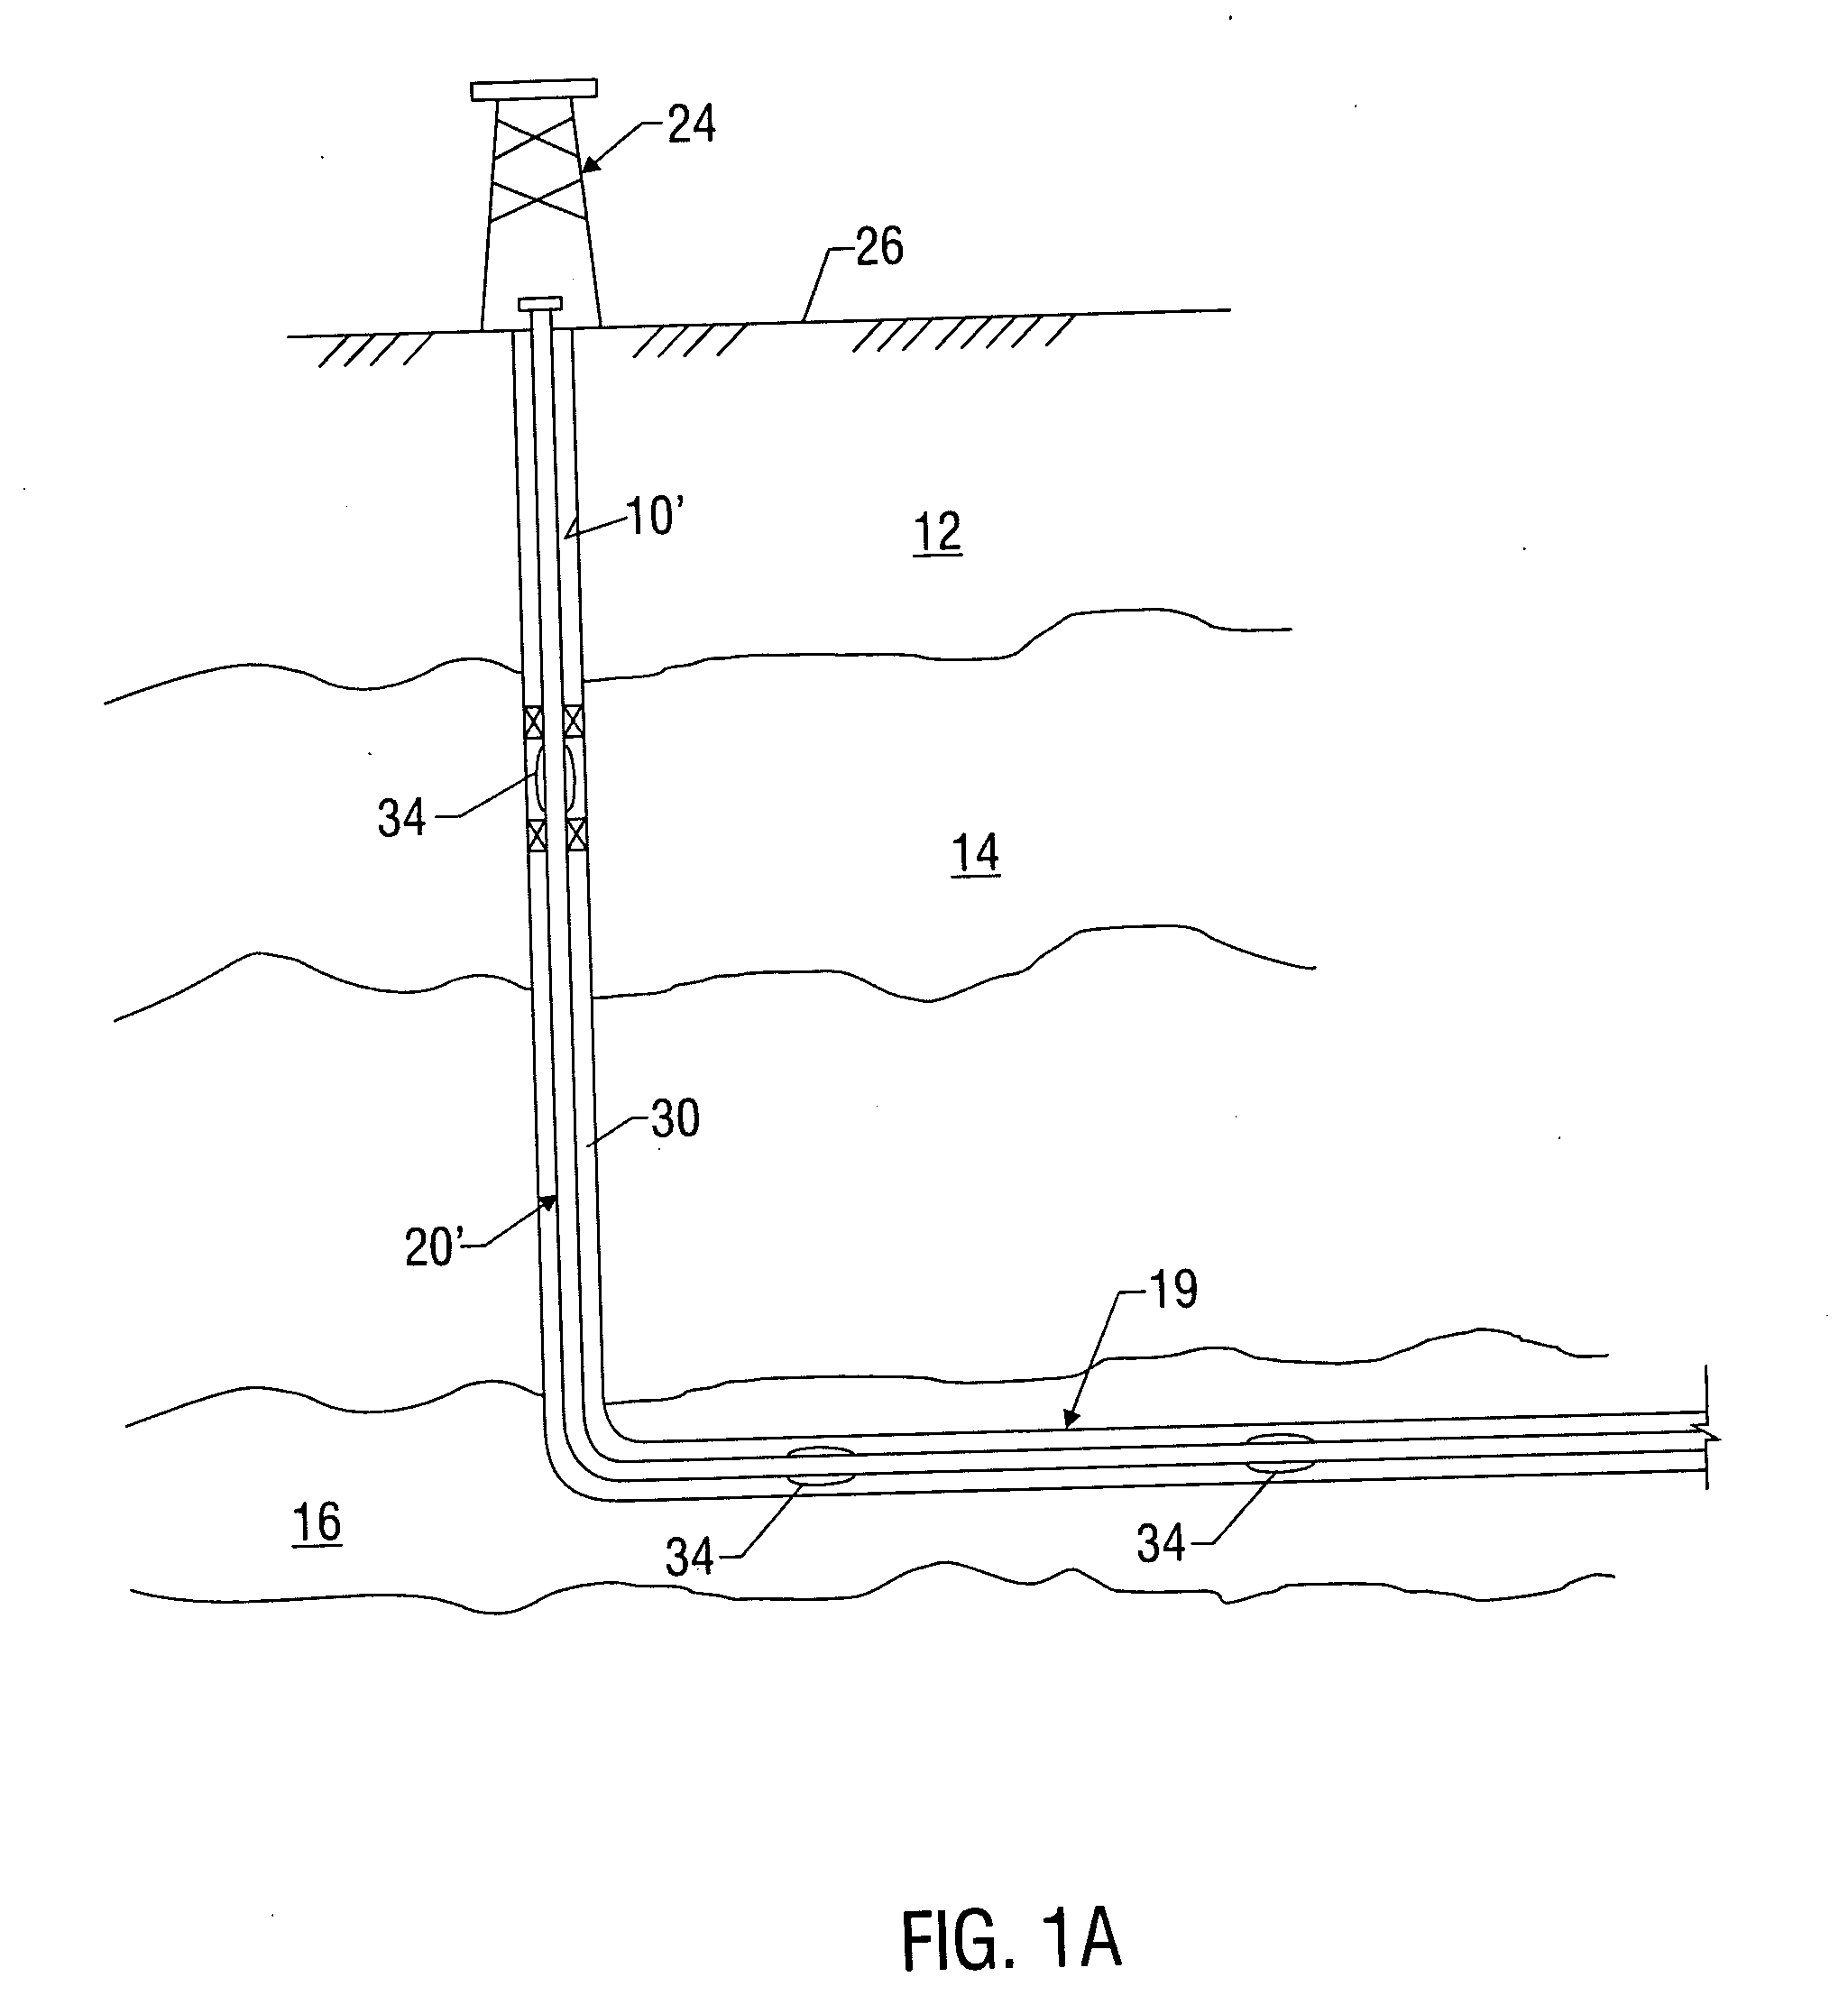 Inflow control device with passive shut-off feature